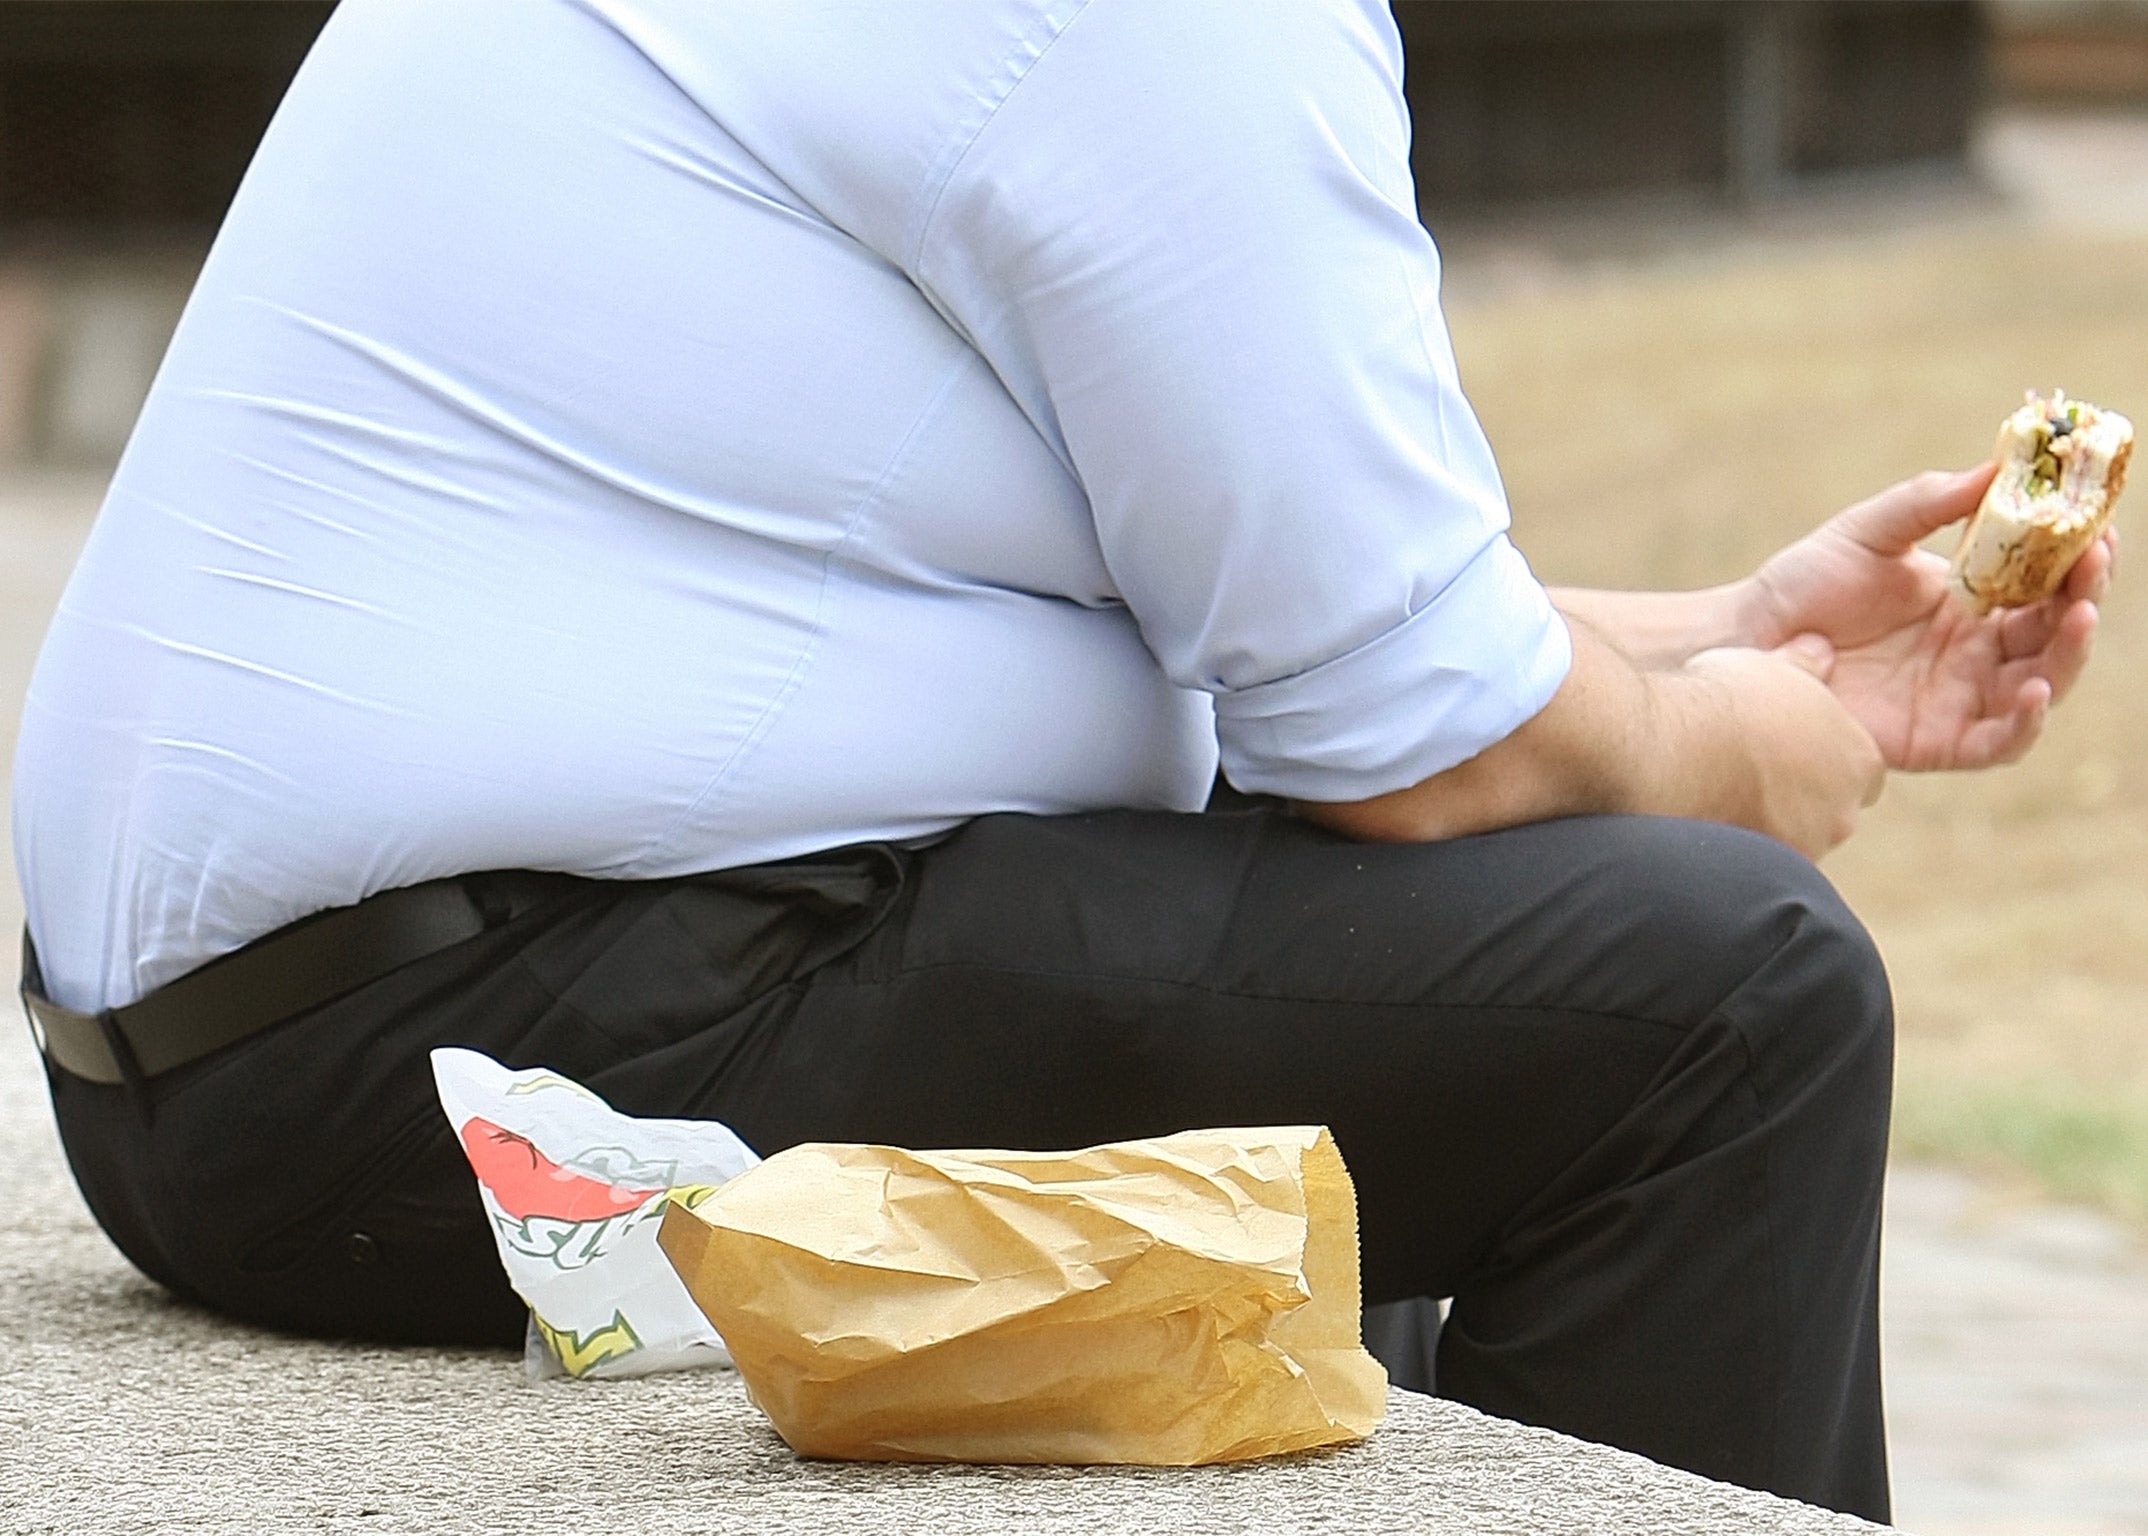 64 per cent of adults are overweight in England